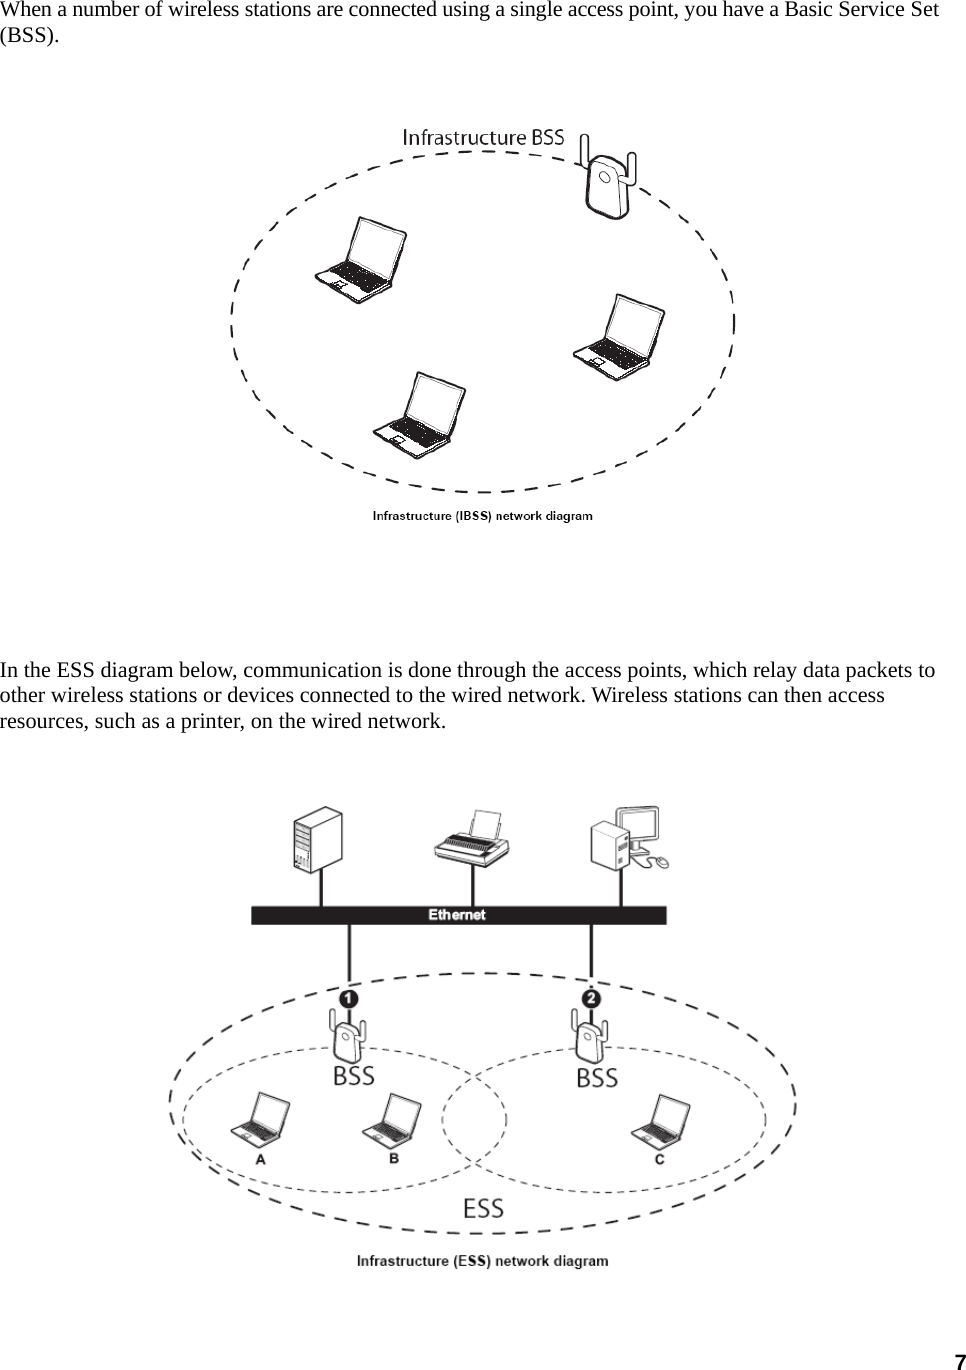 7  When a number of wireless stations are connected using a single access point, you have a Basic Service Set (BSS).         In the ESS diagram below, communication is done through the access points, which relay data packets to other wireless stations or devices connected to the wired network. Wireless stations can then access resources, such as a printer, on the wired network.     